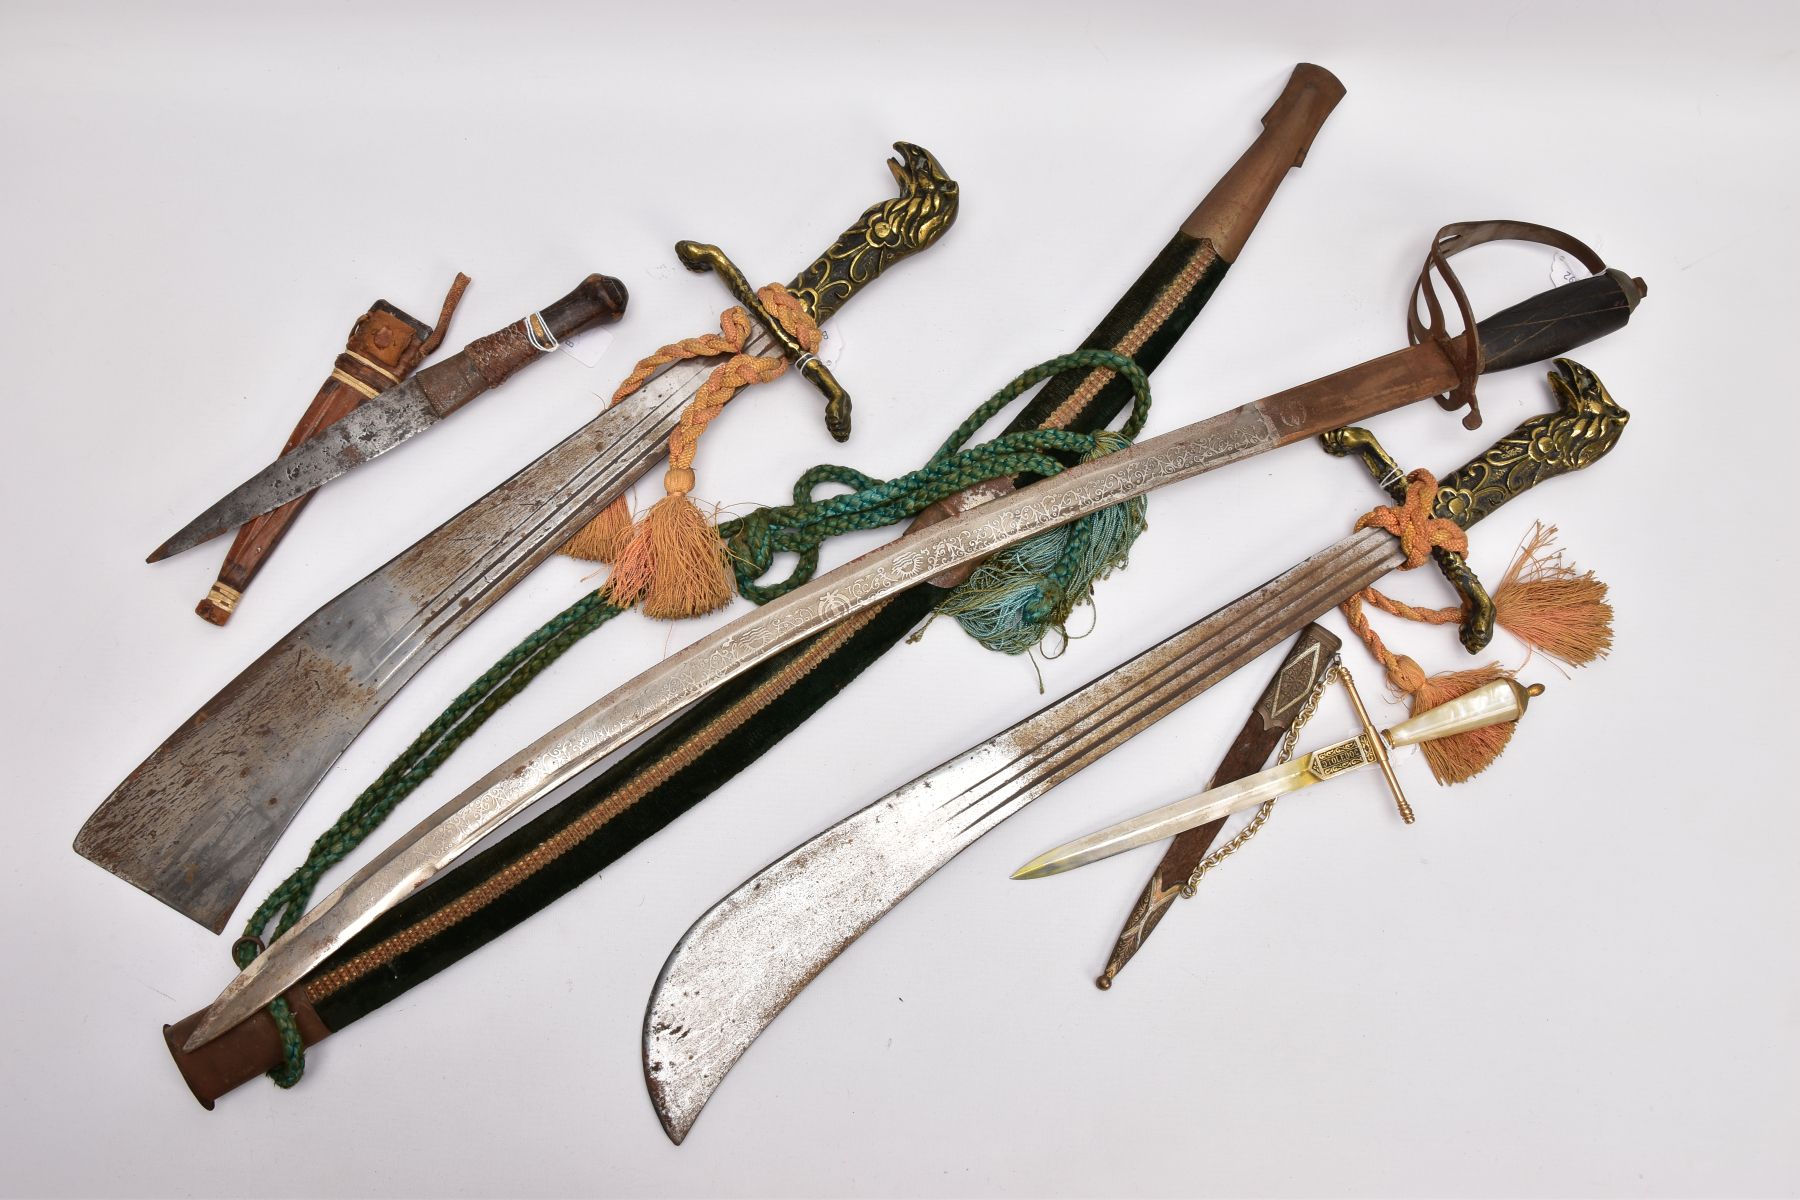 FIVE ASSORTED BLADED WEAPONS, two small short swords, curved blades, poorly constructed, knots in - Image 9 of 14